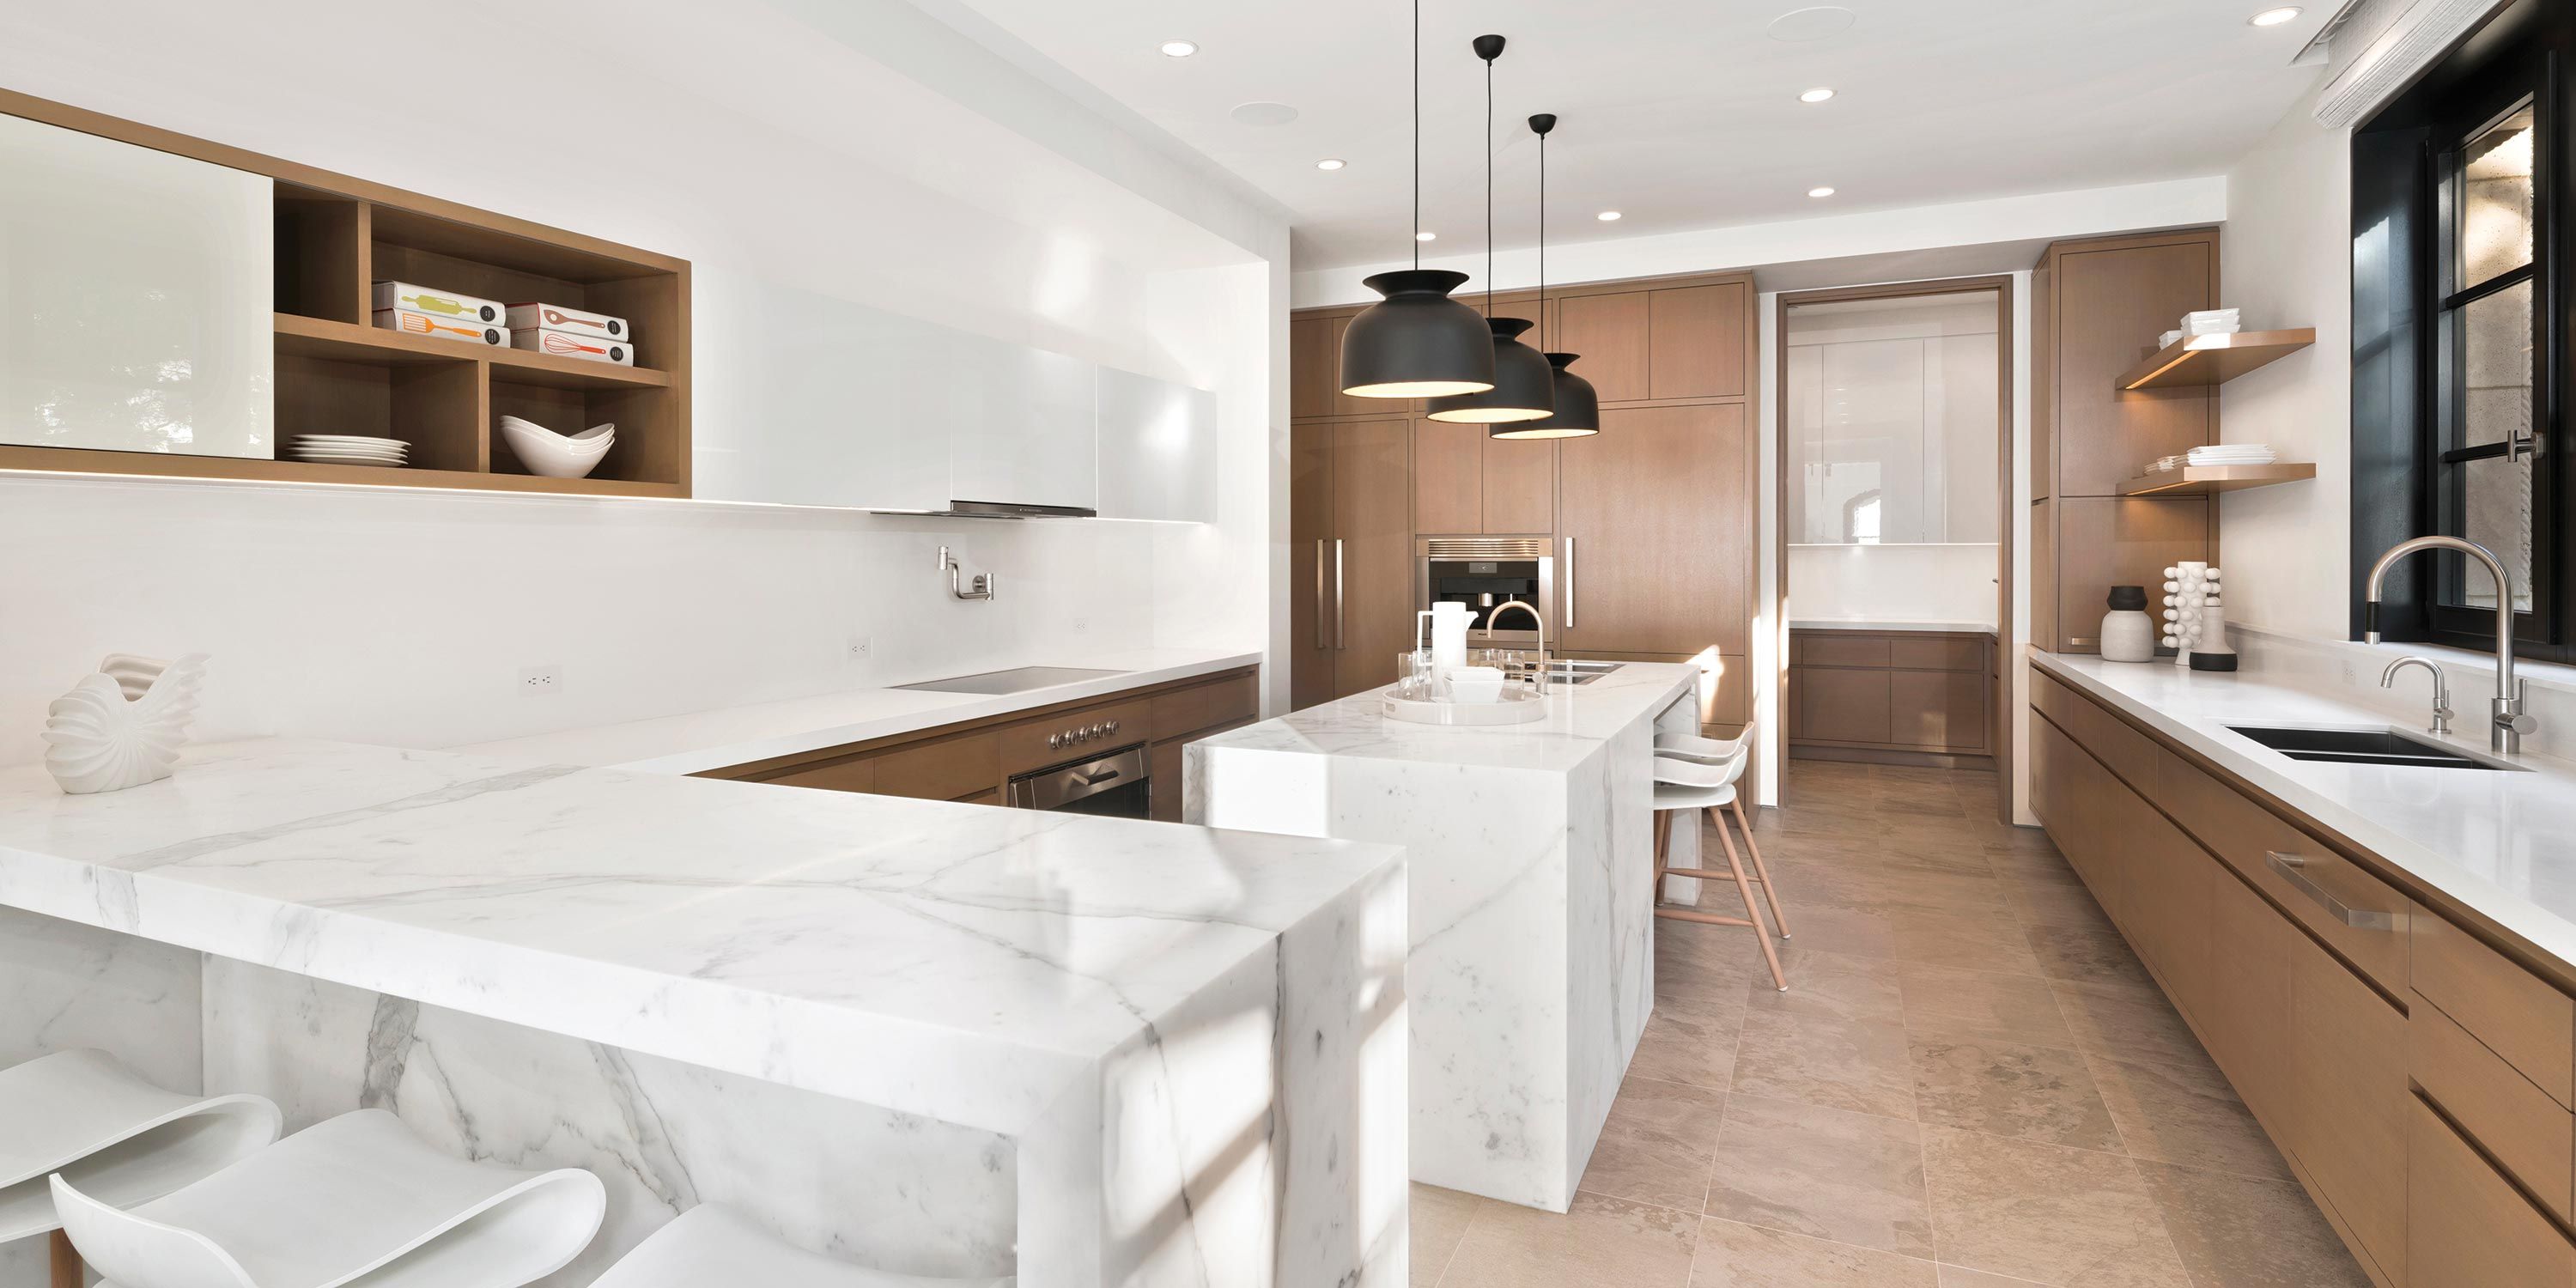 A modern kitchen featuring white marble countertops, sleek wooden cabinetry, and pendant lighting over a central island.